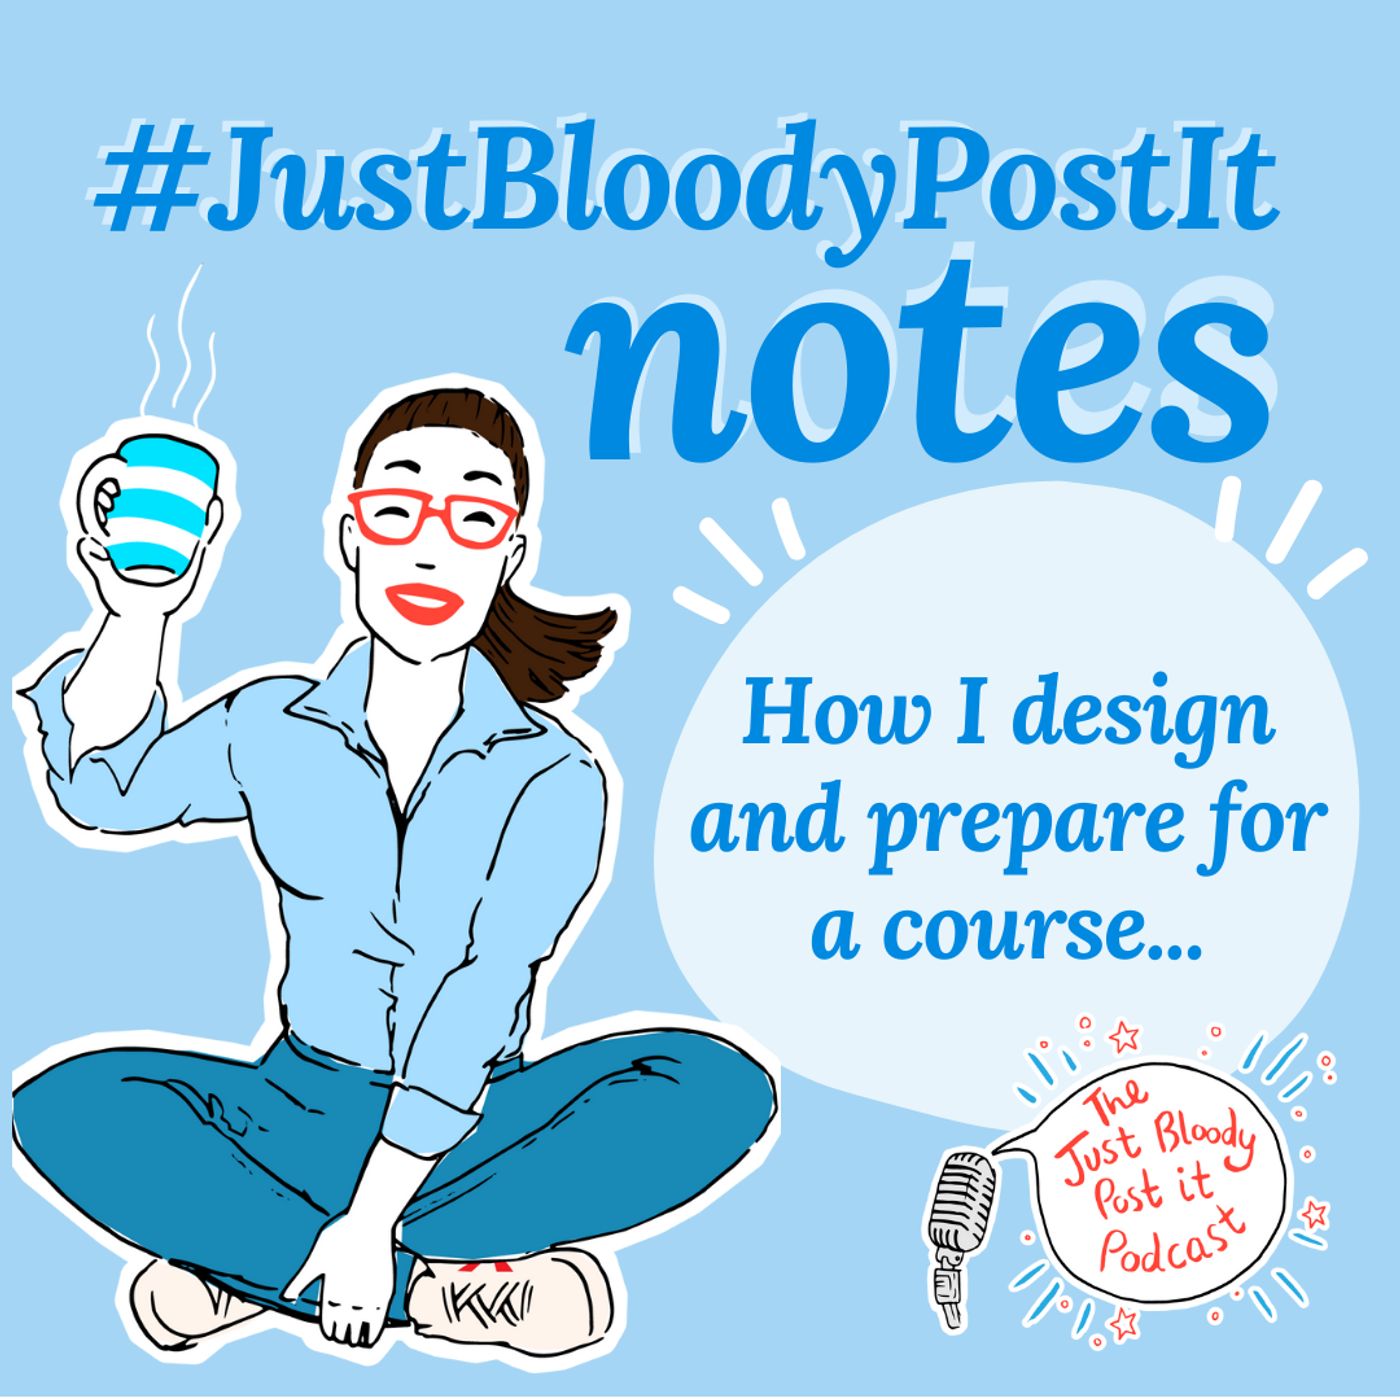 S2 Ep29: #JustBloodyPostIt note for the course curious: how I build mine